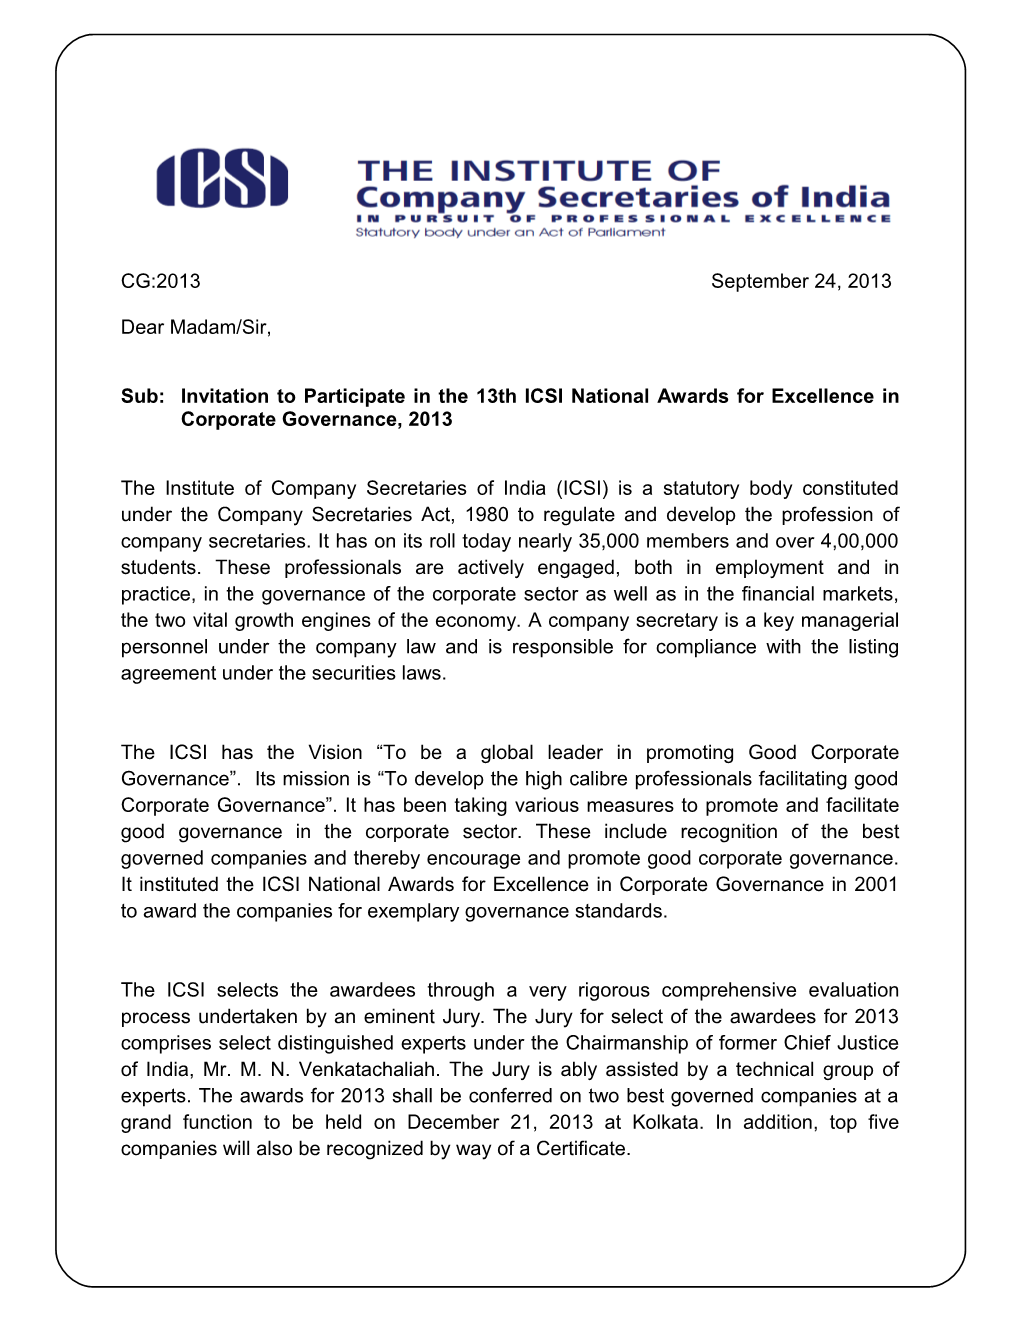 Sub: Invitation to Participate in the 13Th ICSI National Awards for Excellence in Corporate